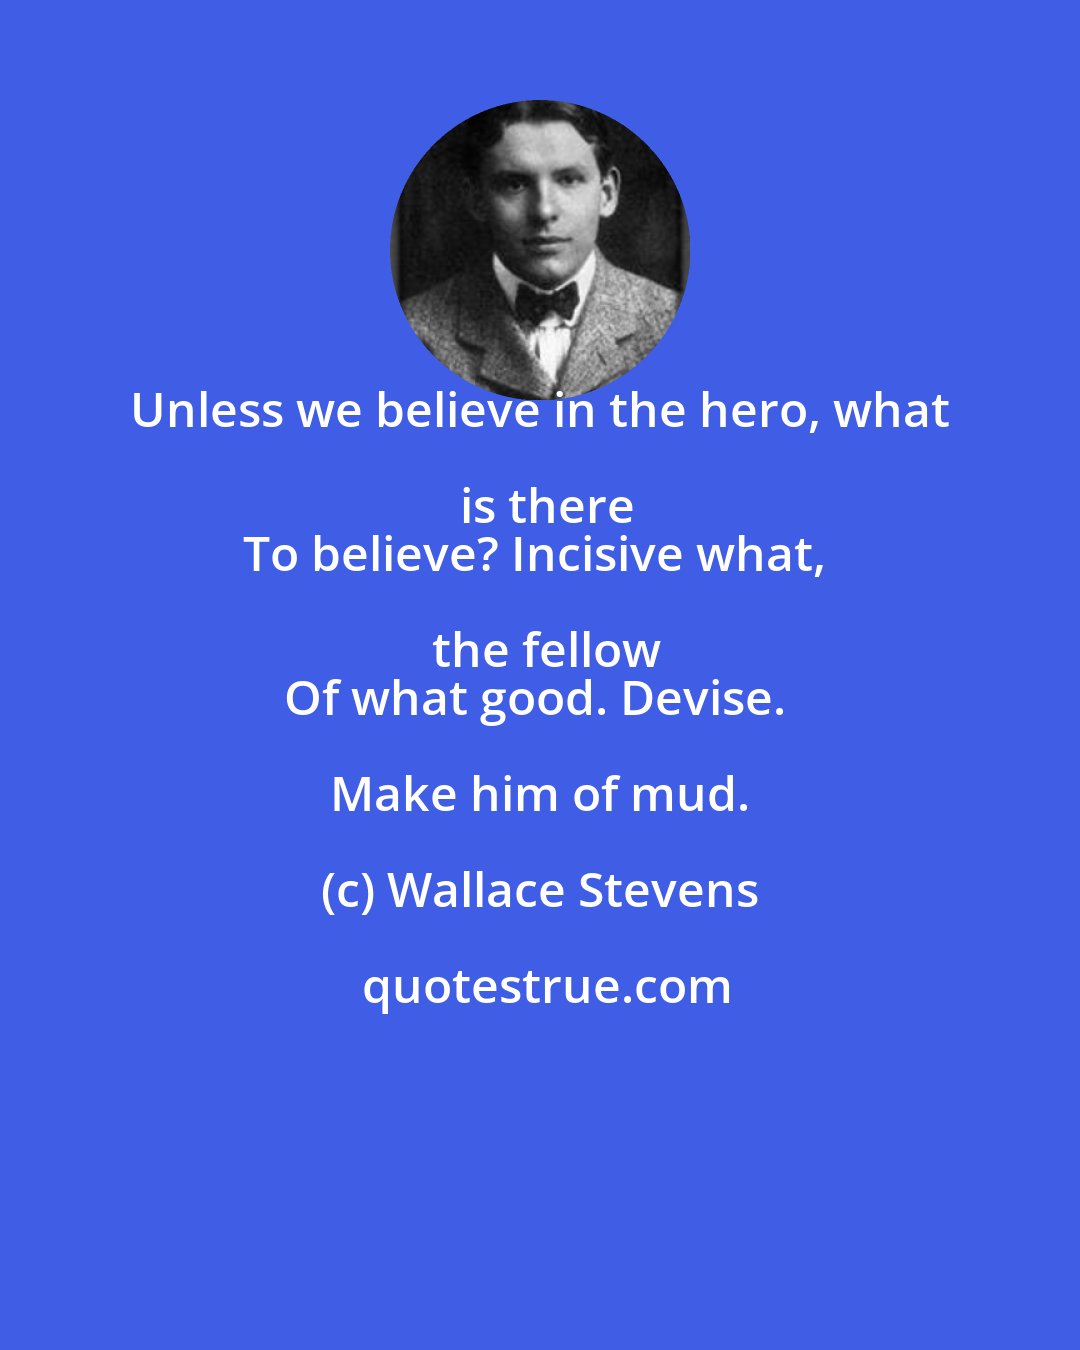 Wallace Stevens: Unless we believe in the hero, what is there
To believe? Incisive what, the fellow
Of what good. Devise. Make him of mud.